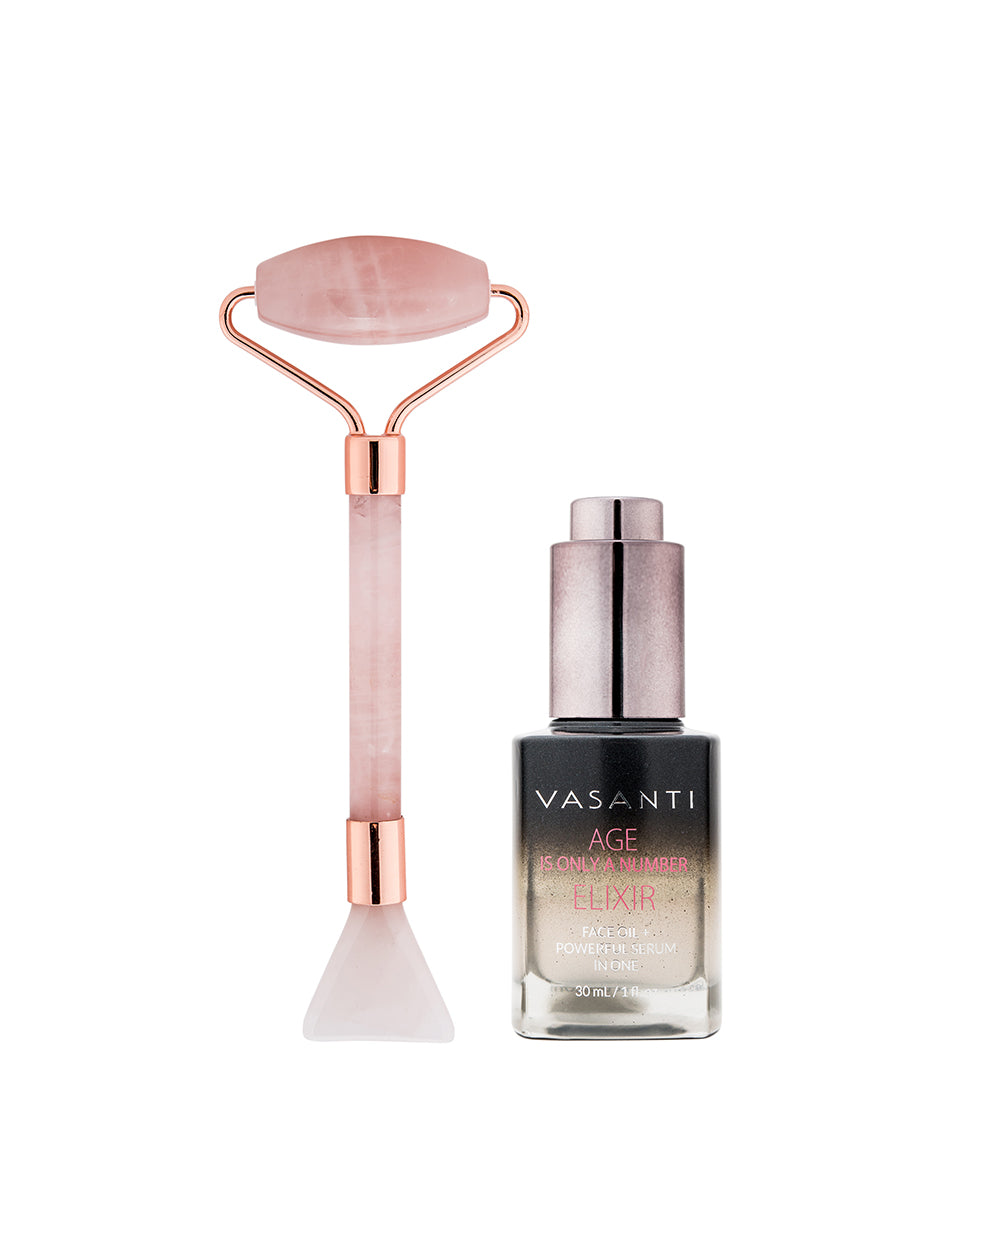 Age is Only a Number Elixir + Rose Quartz Roller & Gua Sha Tool